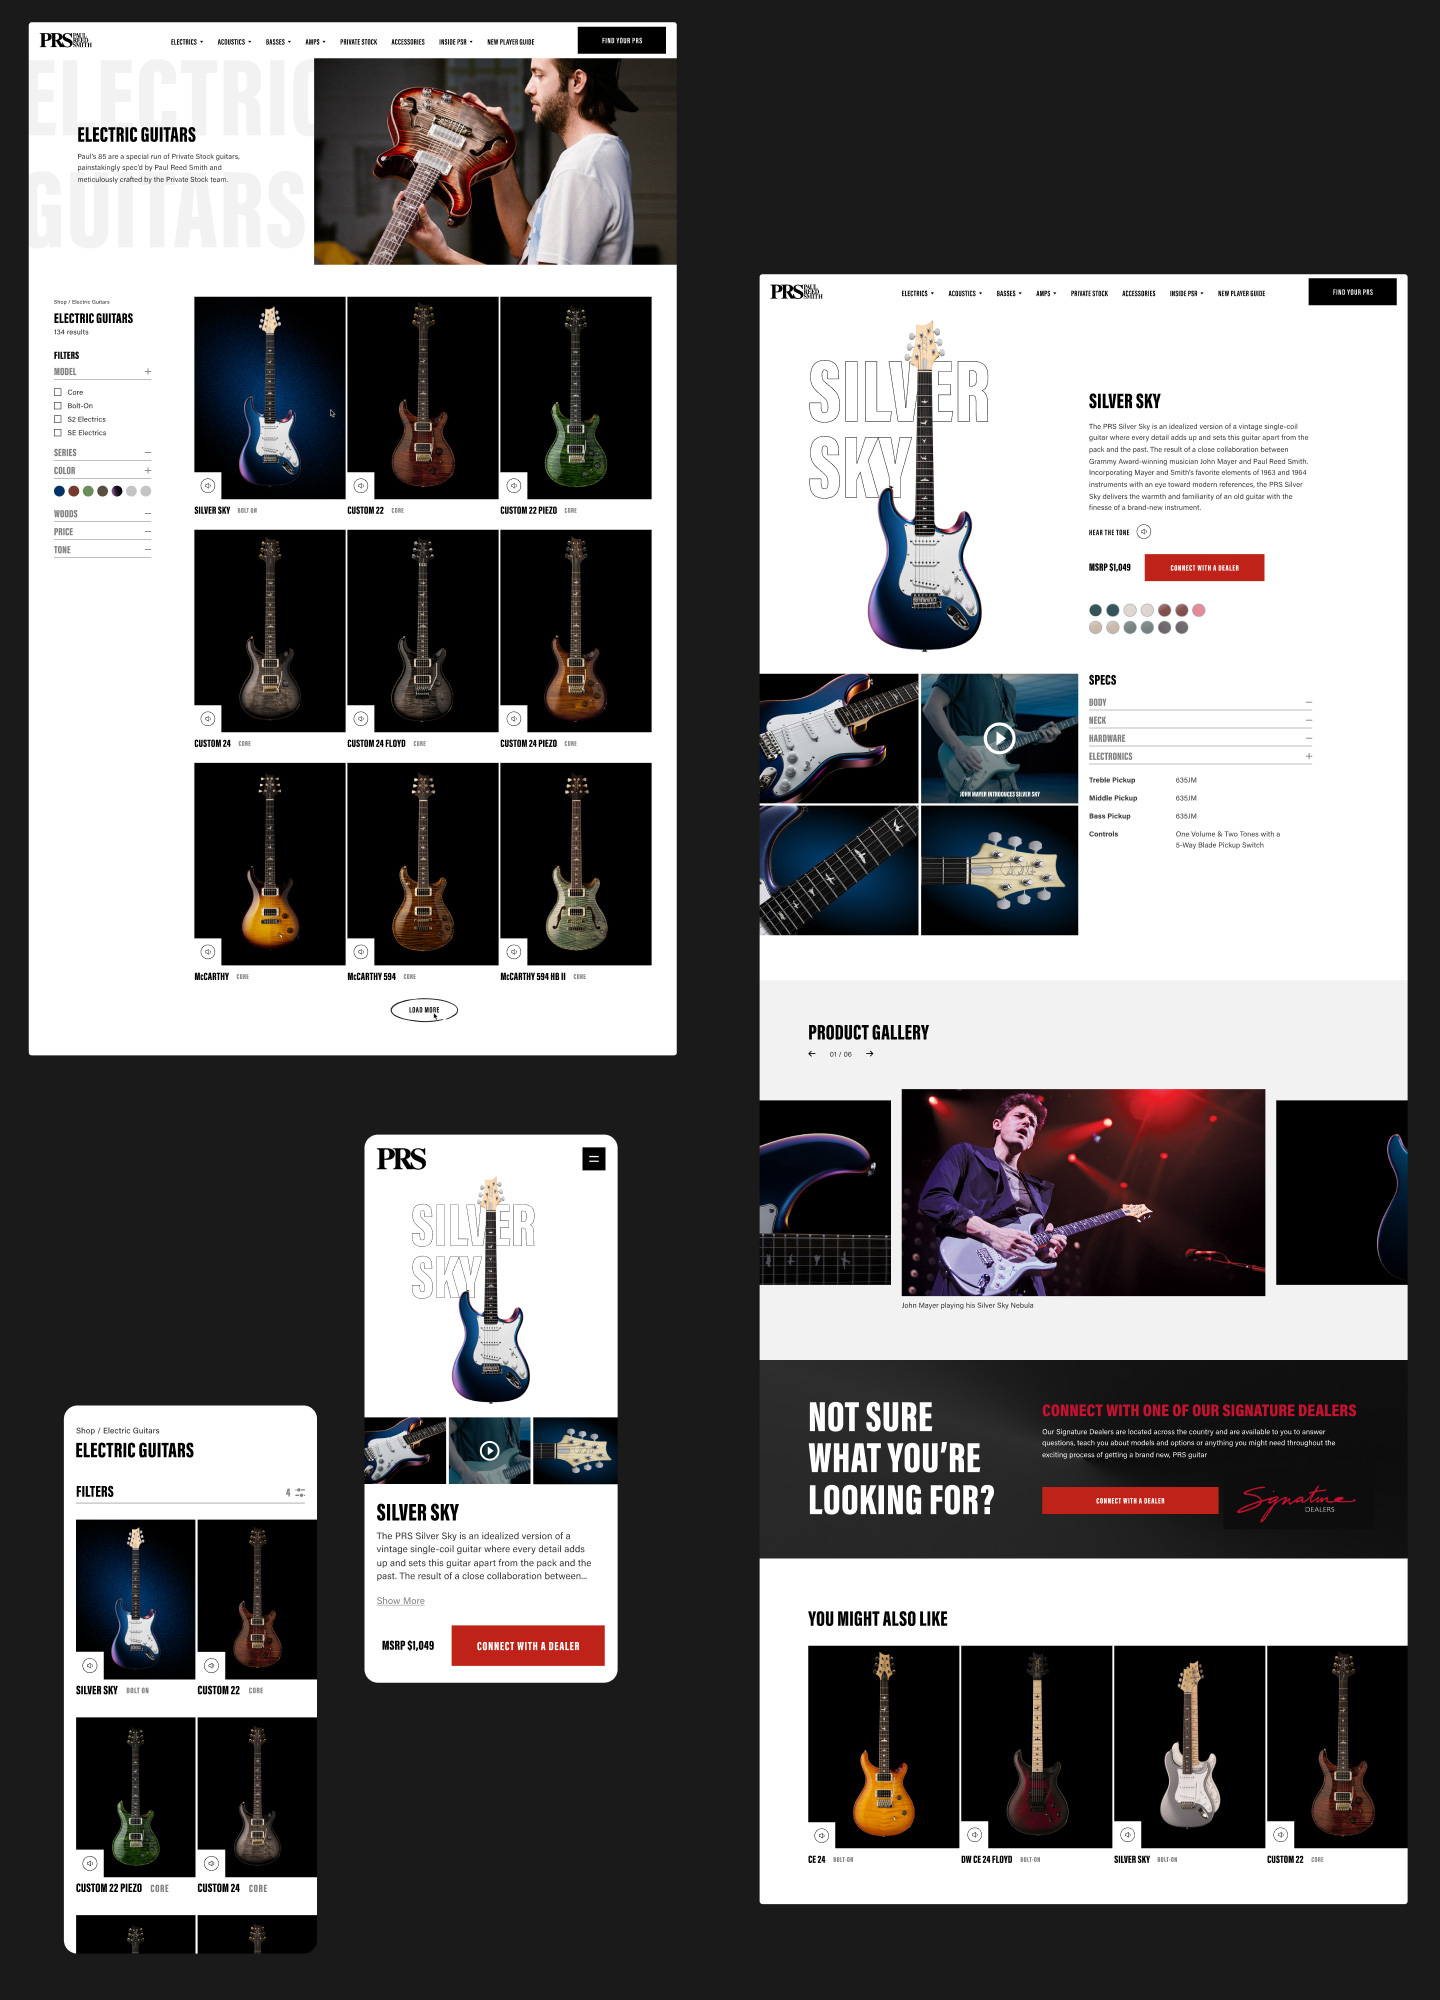 PRS Guitars reimagined ecommerce filtering and functionality